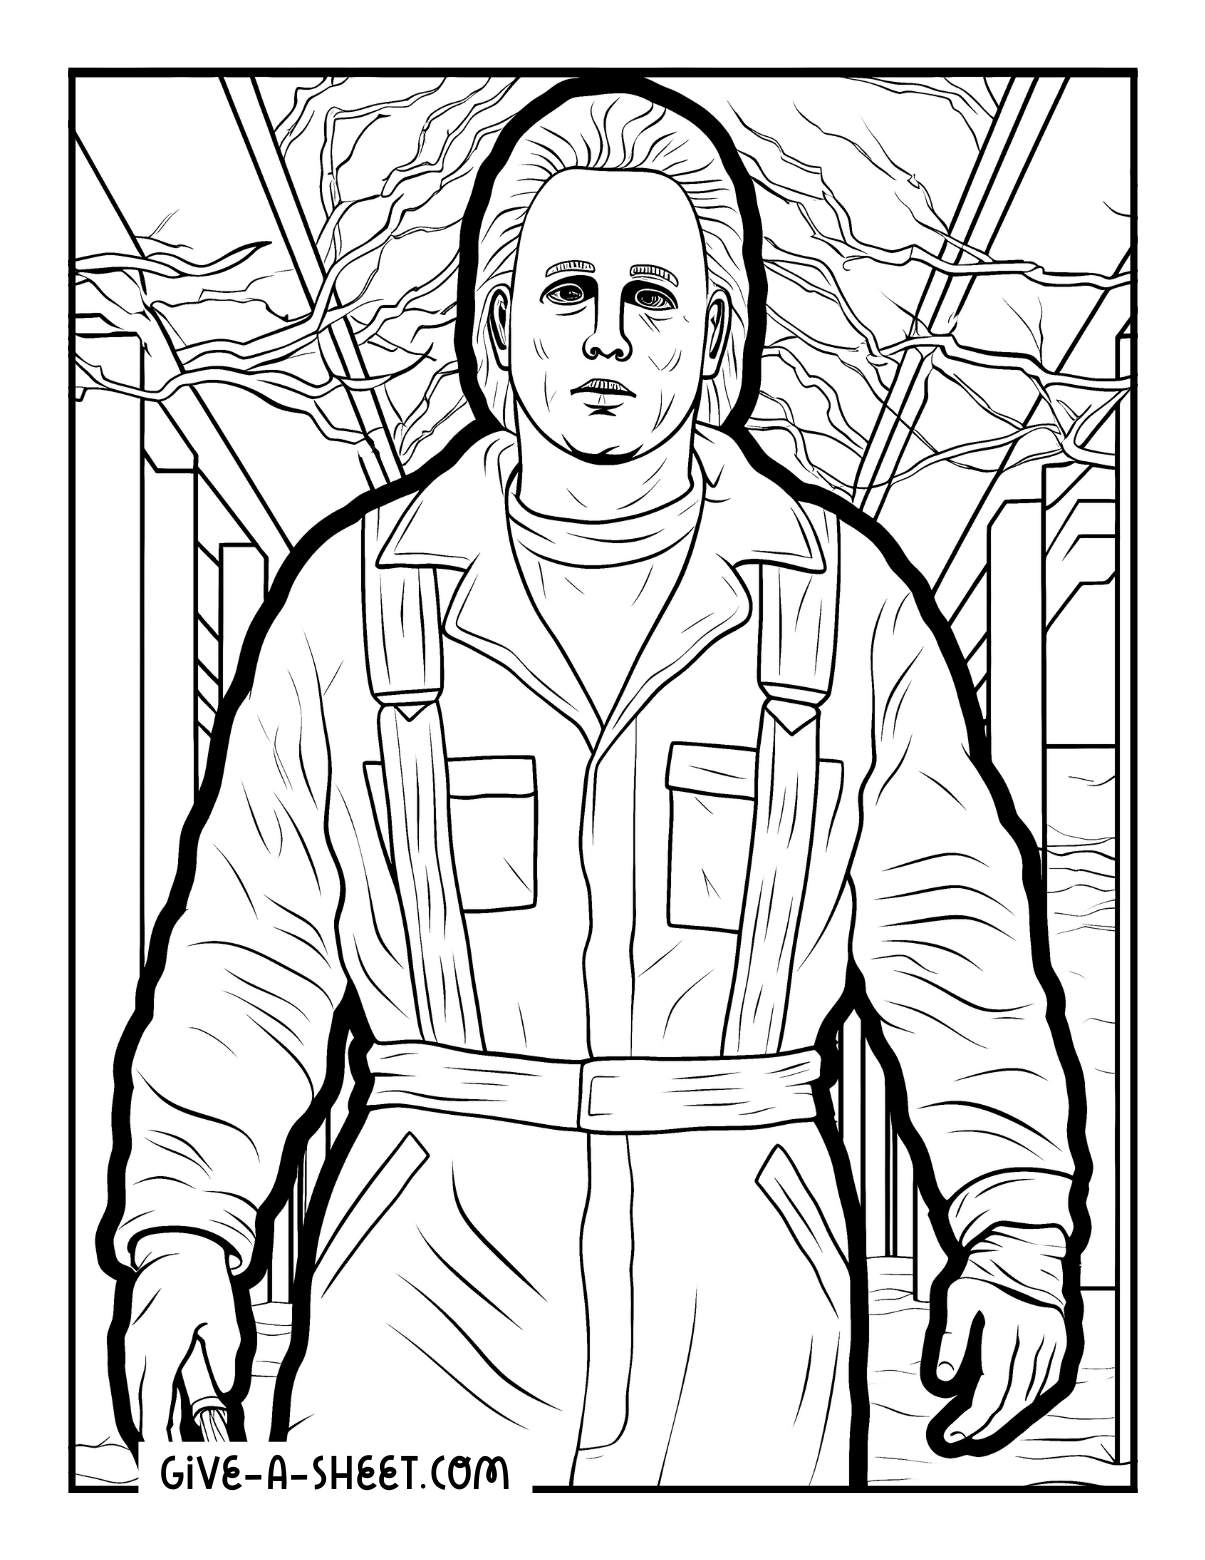 Michael Myers walking in Haddonfield on Halloween night coloring page.